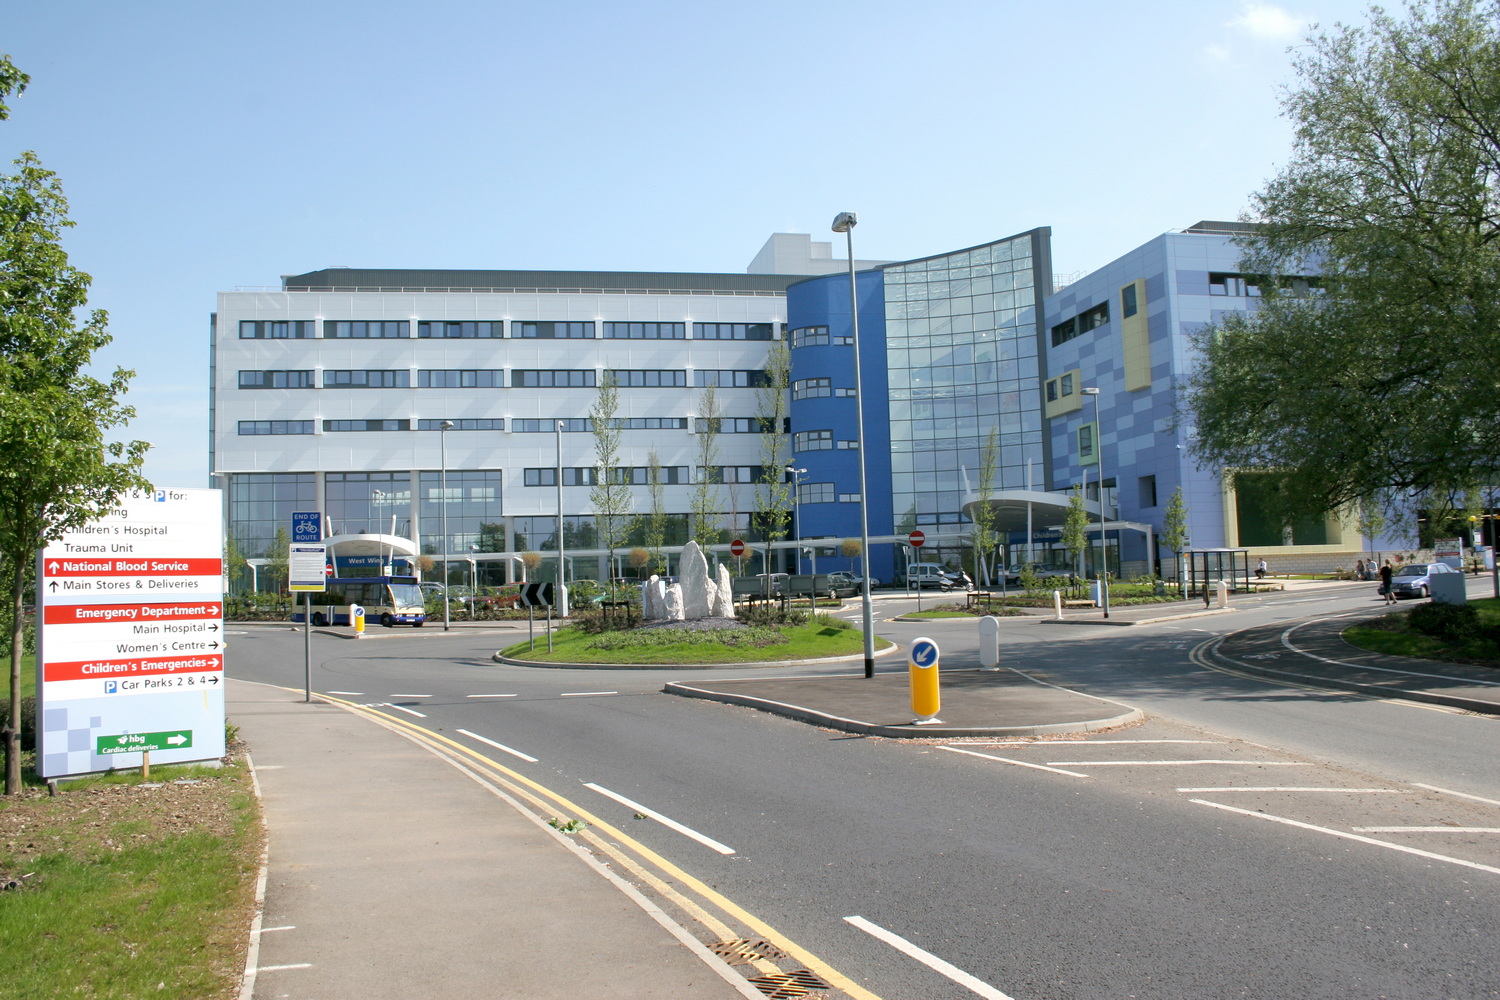 How LED Lights Can Help Estate Managers Decarbonize NHS Hospitals